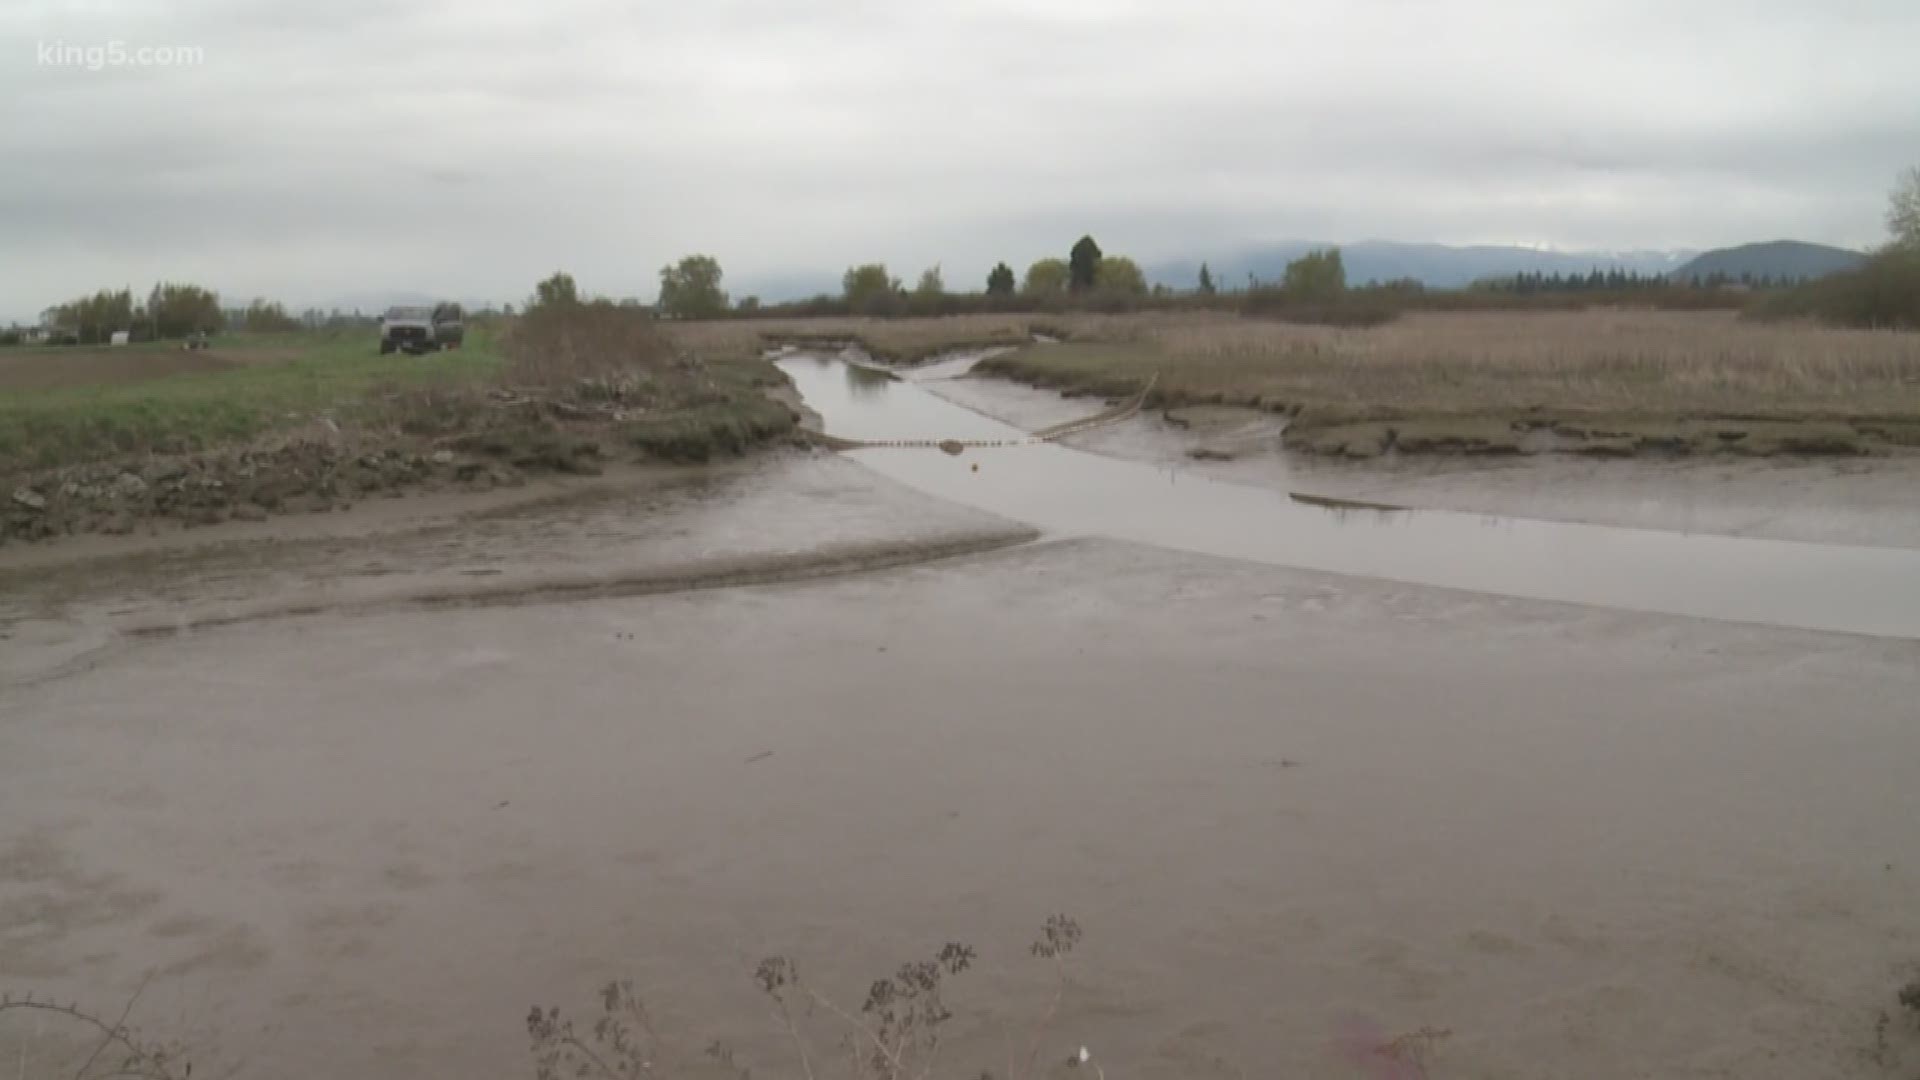 KING 5's Alison Morrow takes you back to the Skagit to the estuary, where older salmon migrate to grow even stronger for their journey to the ocean.